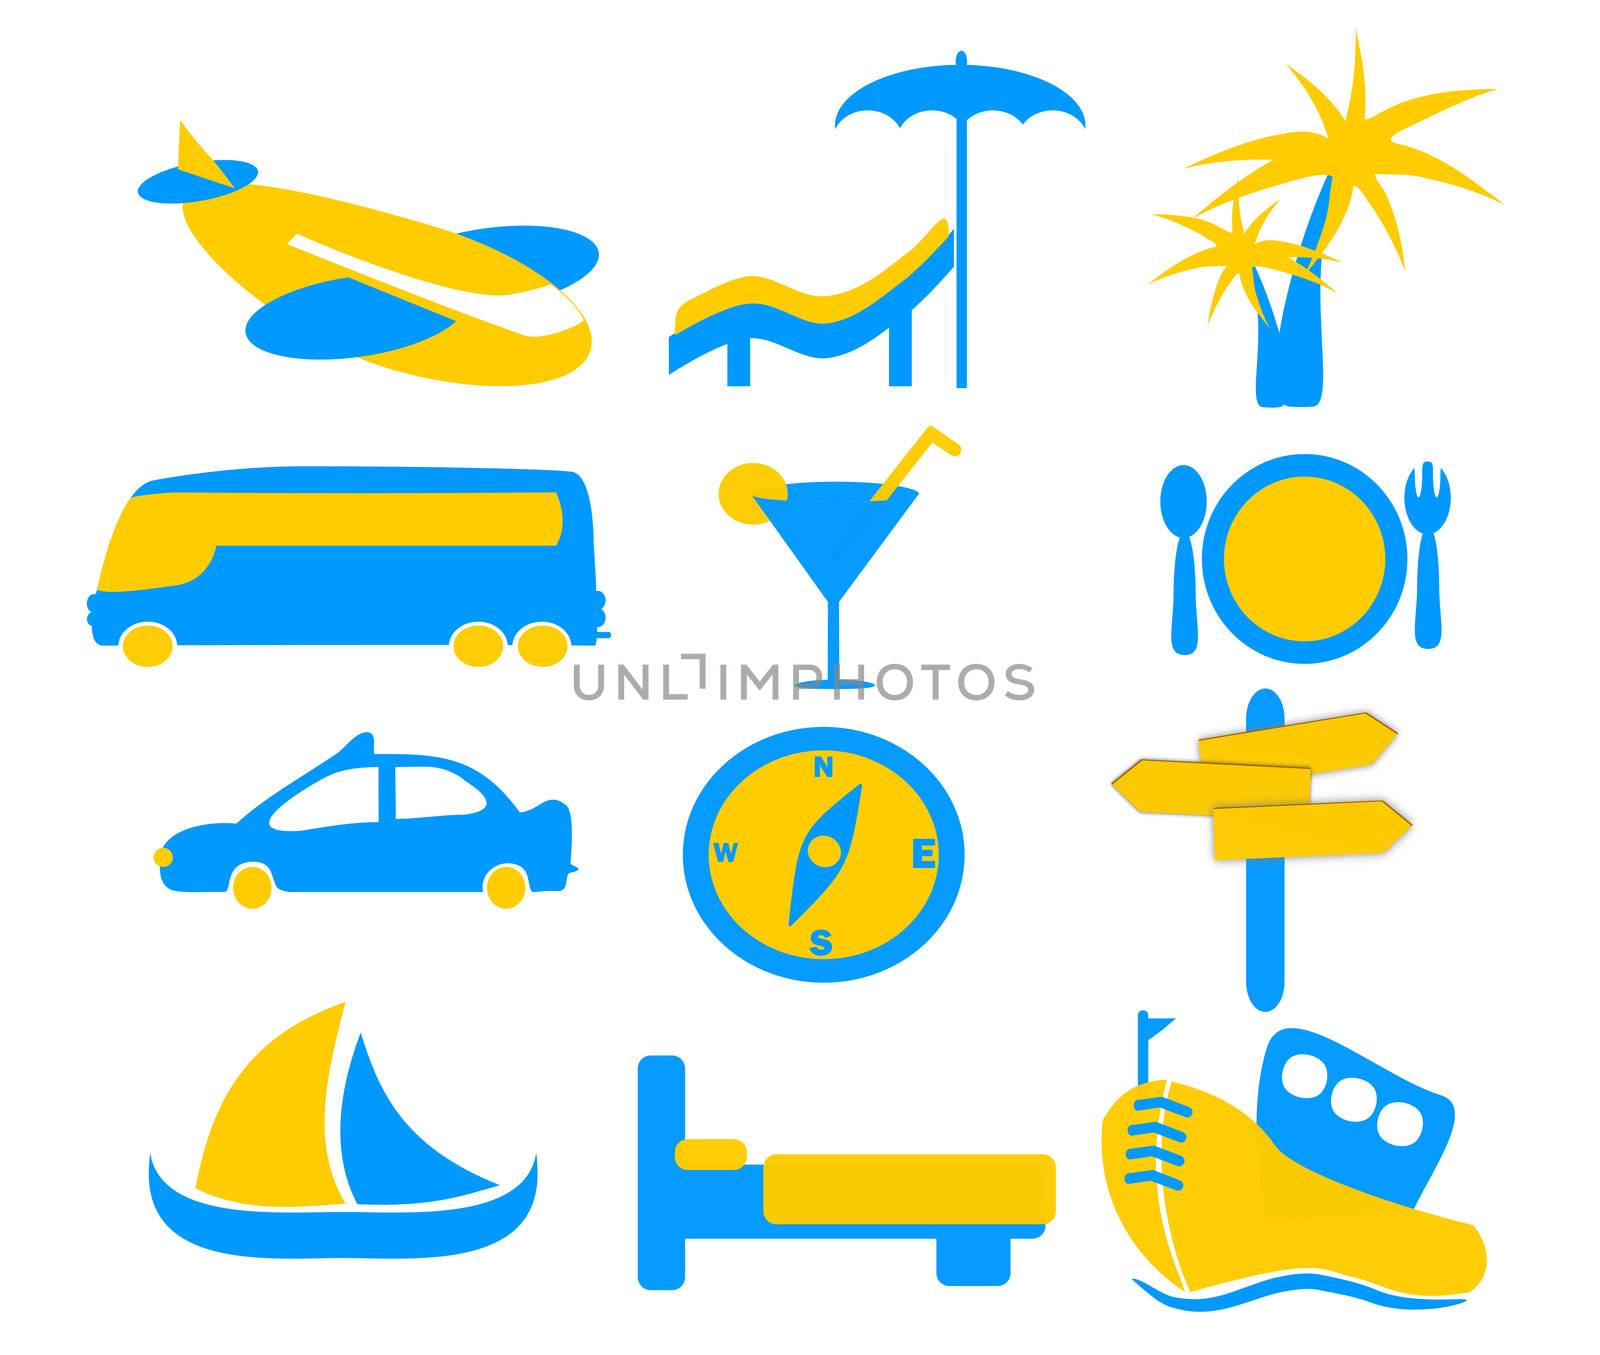 A set of holiday and travel icon graphics in orange and blue colors